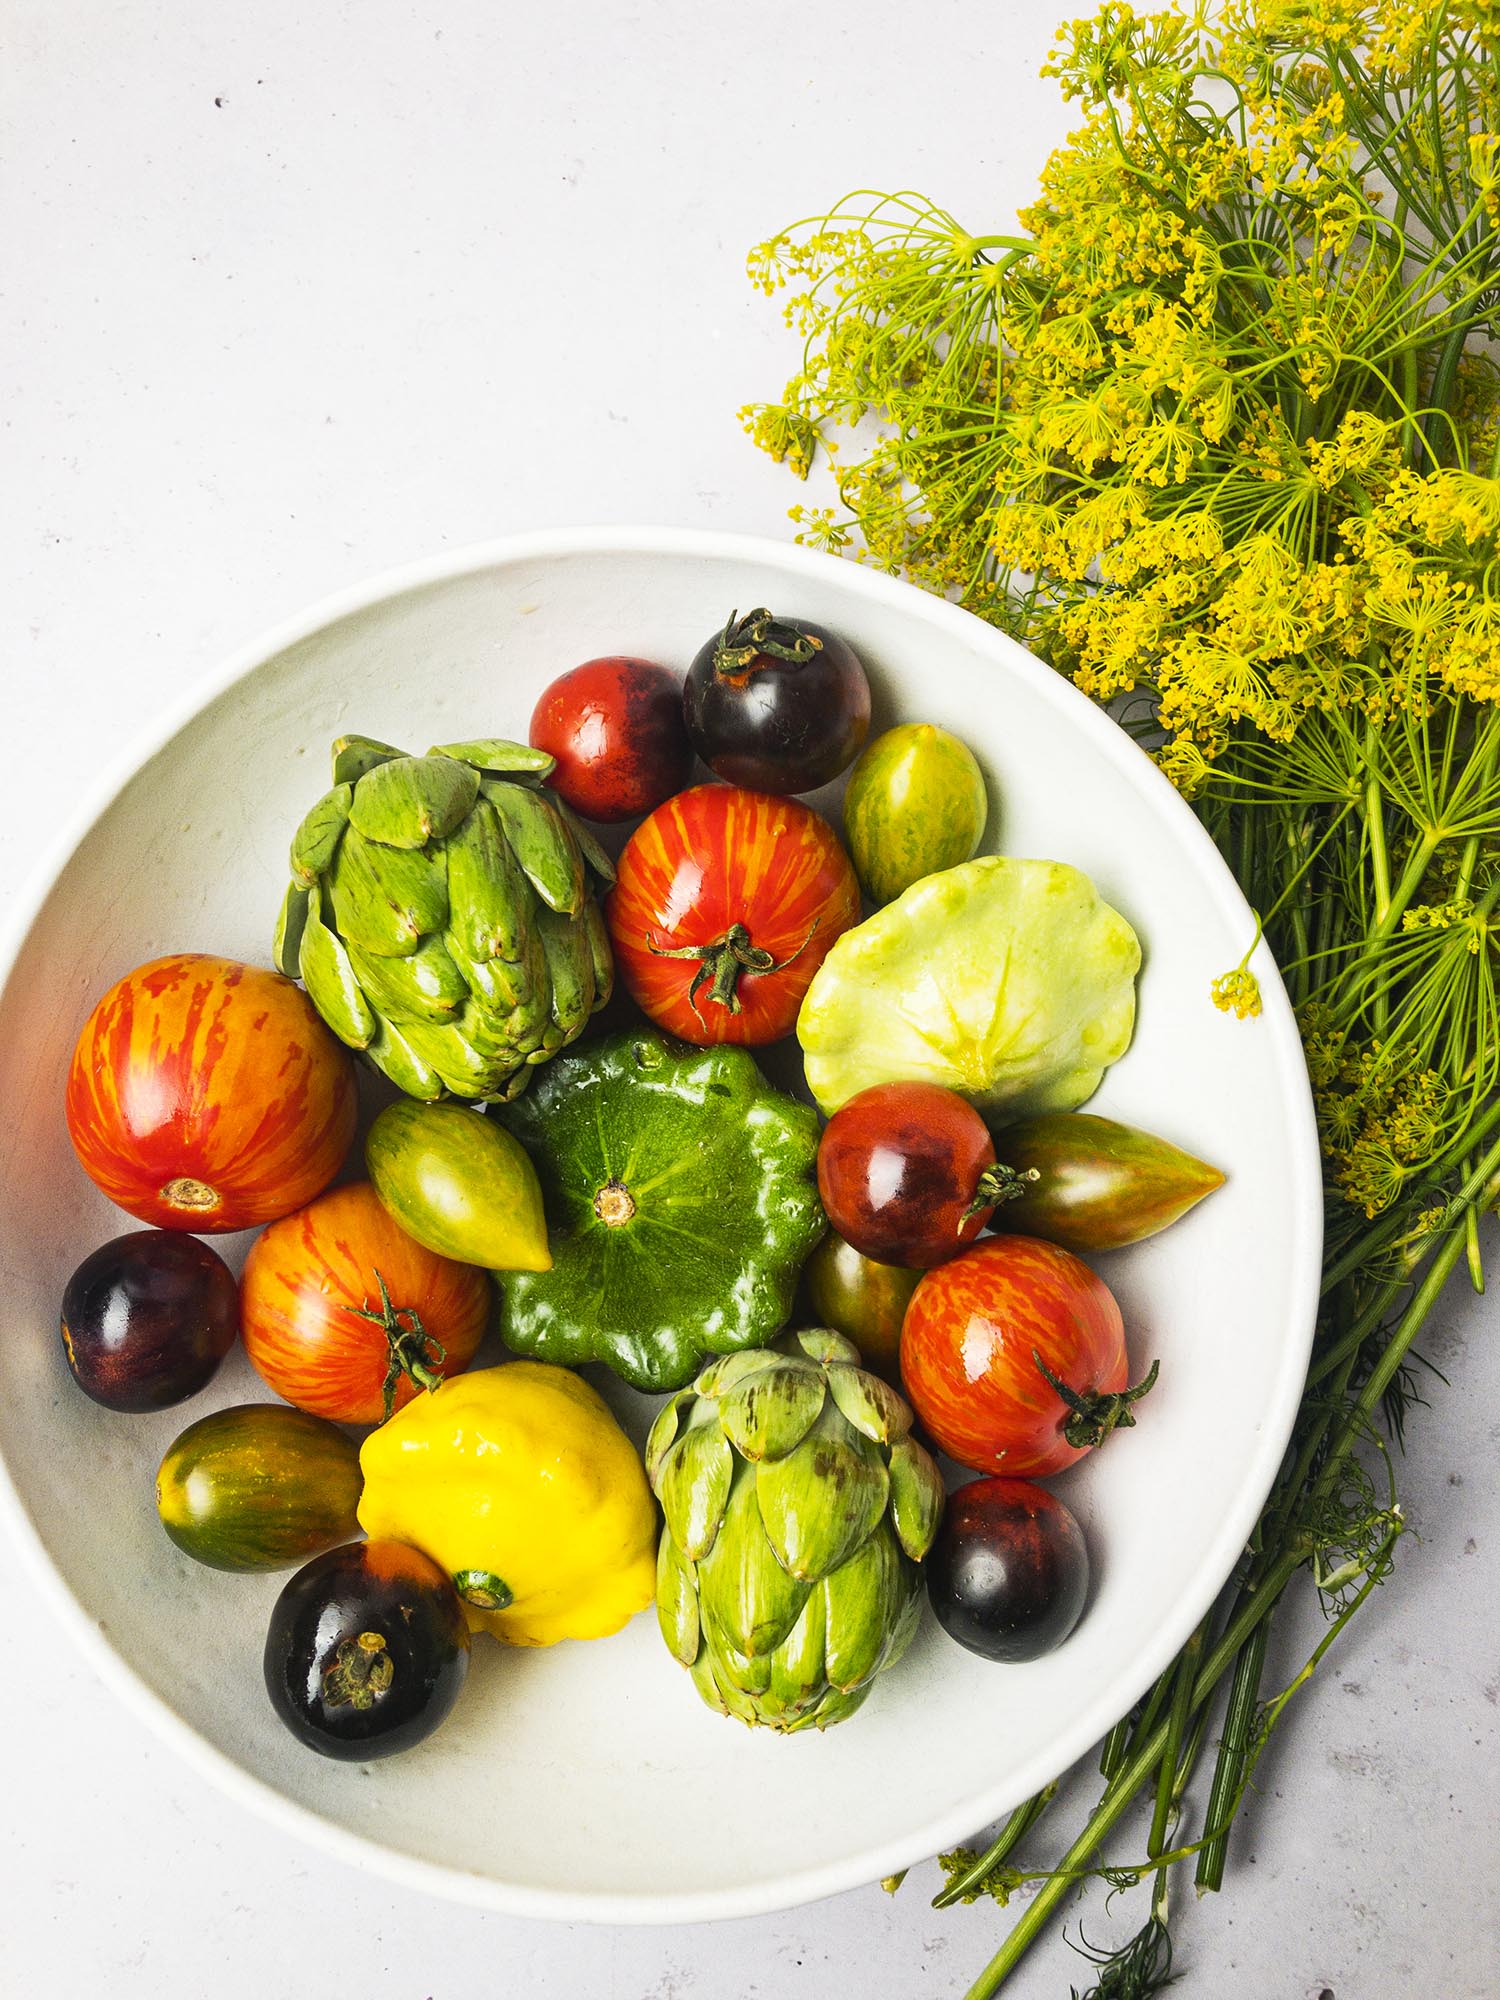 Vegetables in a white bowl: heirloom tomatoes, artichoke, and zucchini. A bouquet of dill surrounds the bowl.